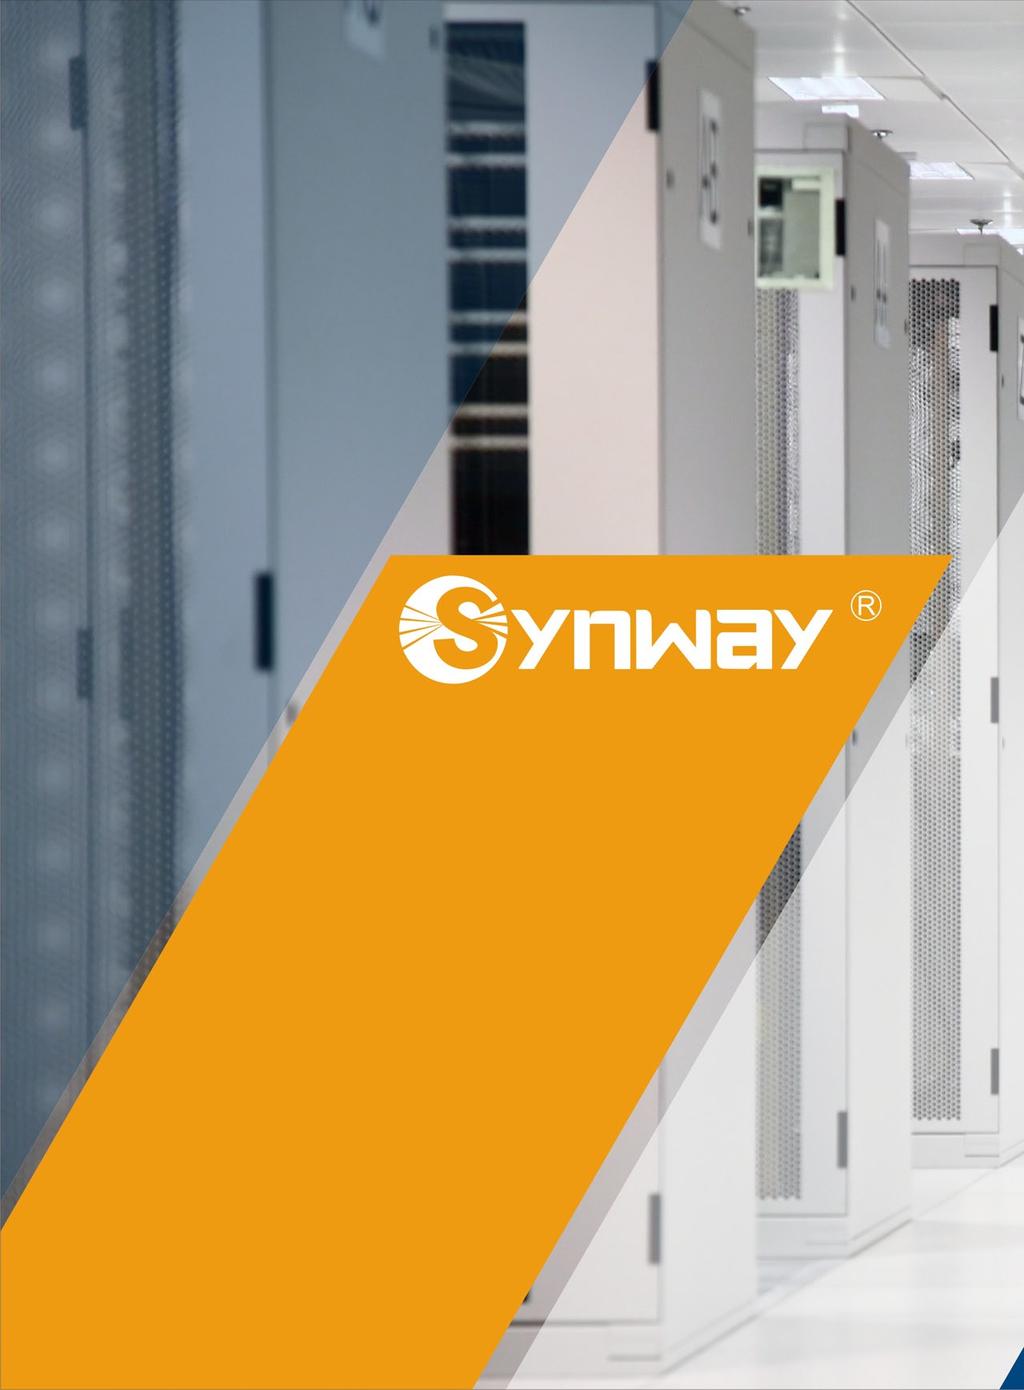 Synway Information Engineering Co., Ltd. Synway R&D Building No.3756, Nanhuan Road, Binjiang Hangzhou, 310053, China TEL: +86 571 88860561 FAX: +86 571 88850923 HTTP://www.synway.